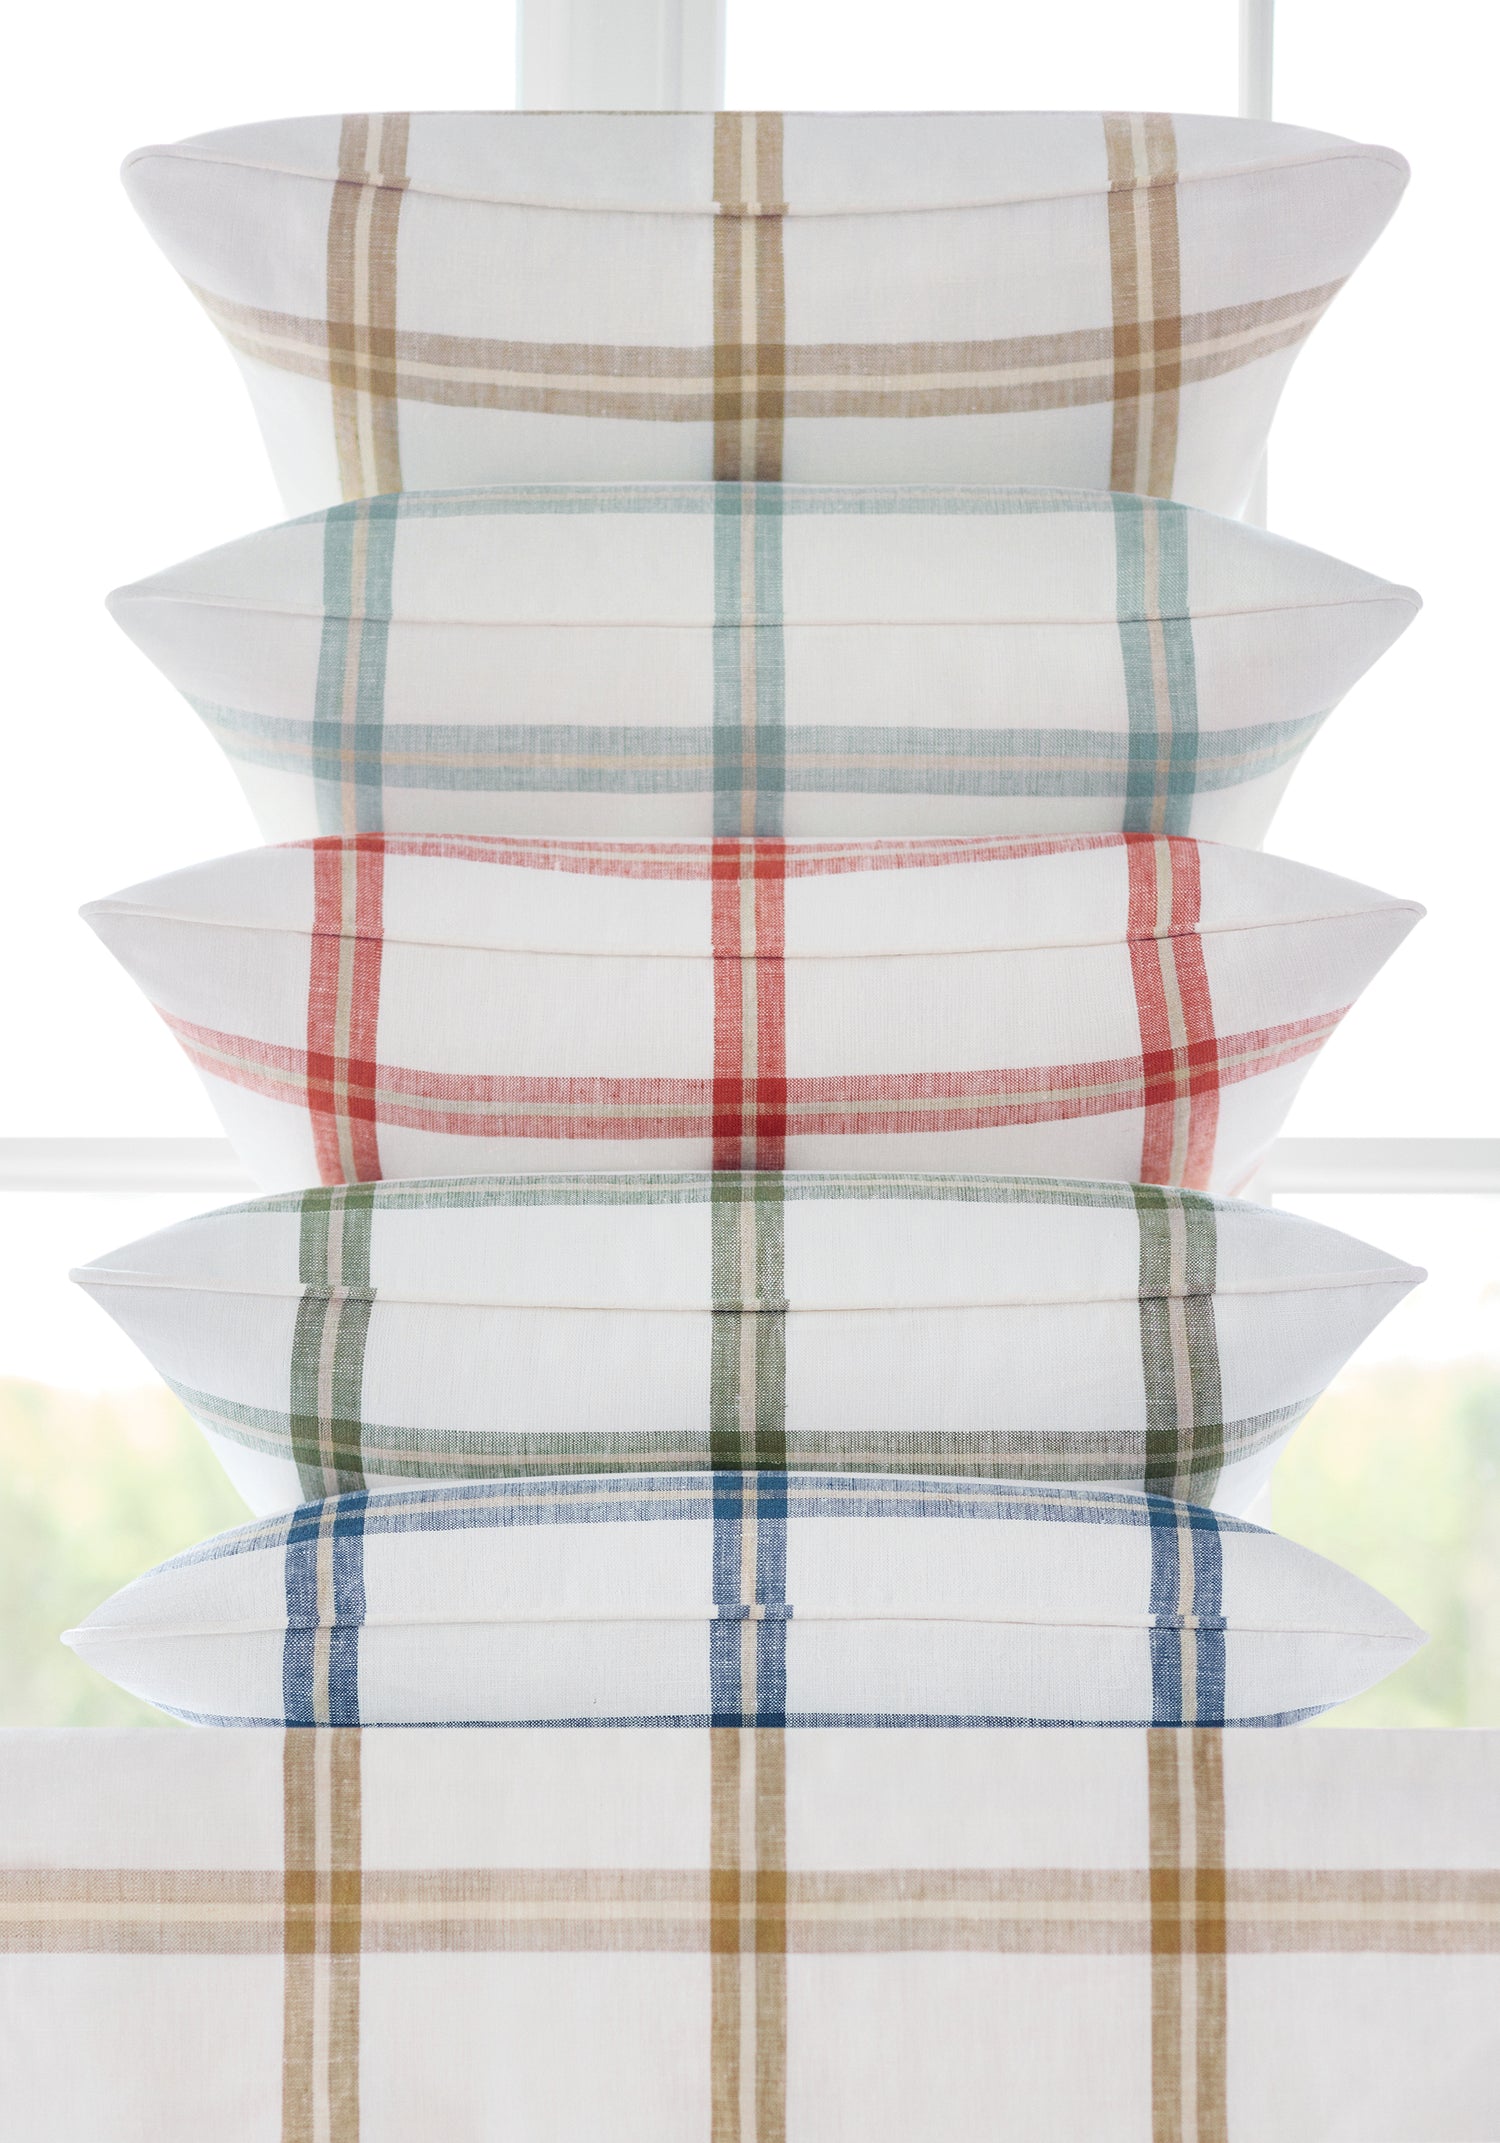 Pillows featuring Huntington Plaid fabric in camel color - pattern number W781333 - by Thibaut in the Montecito collection